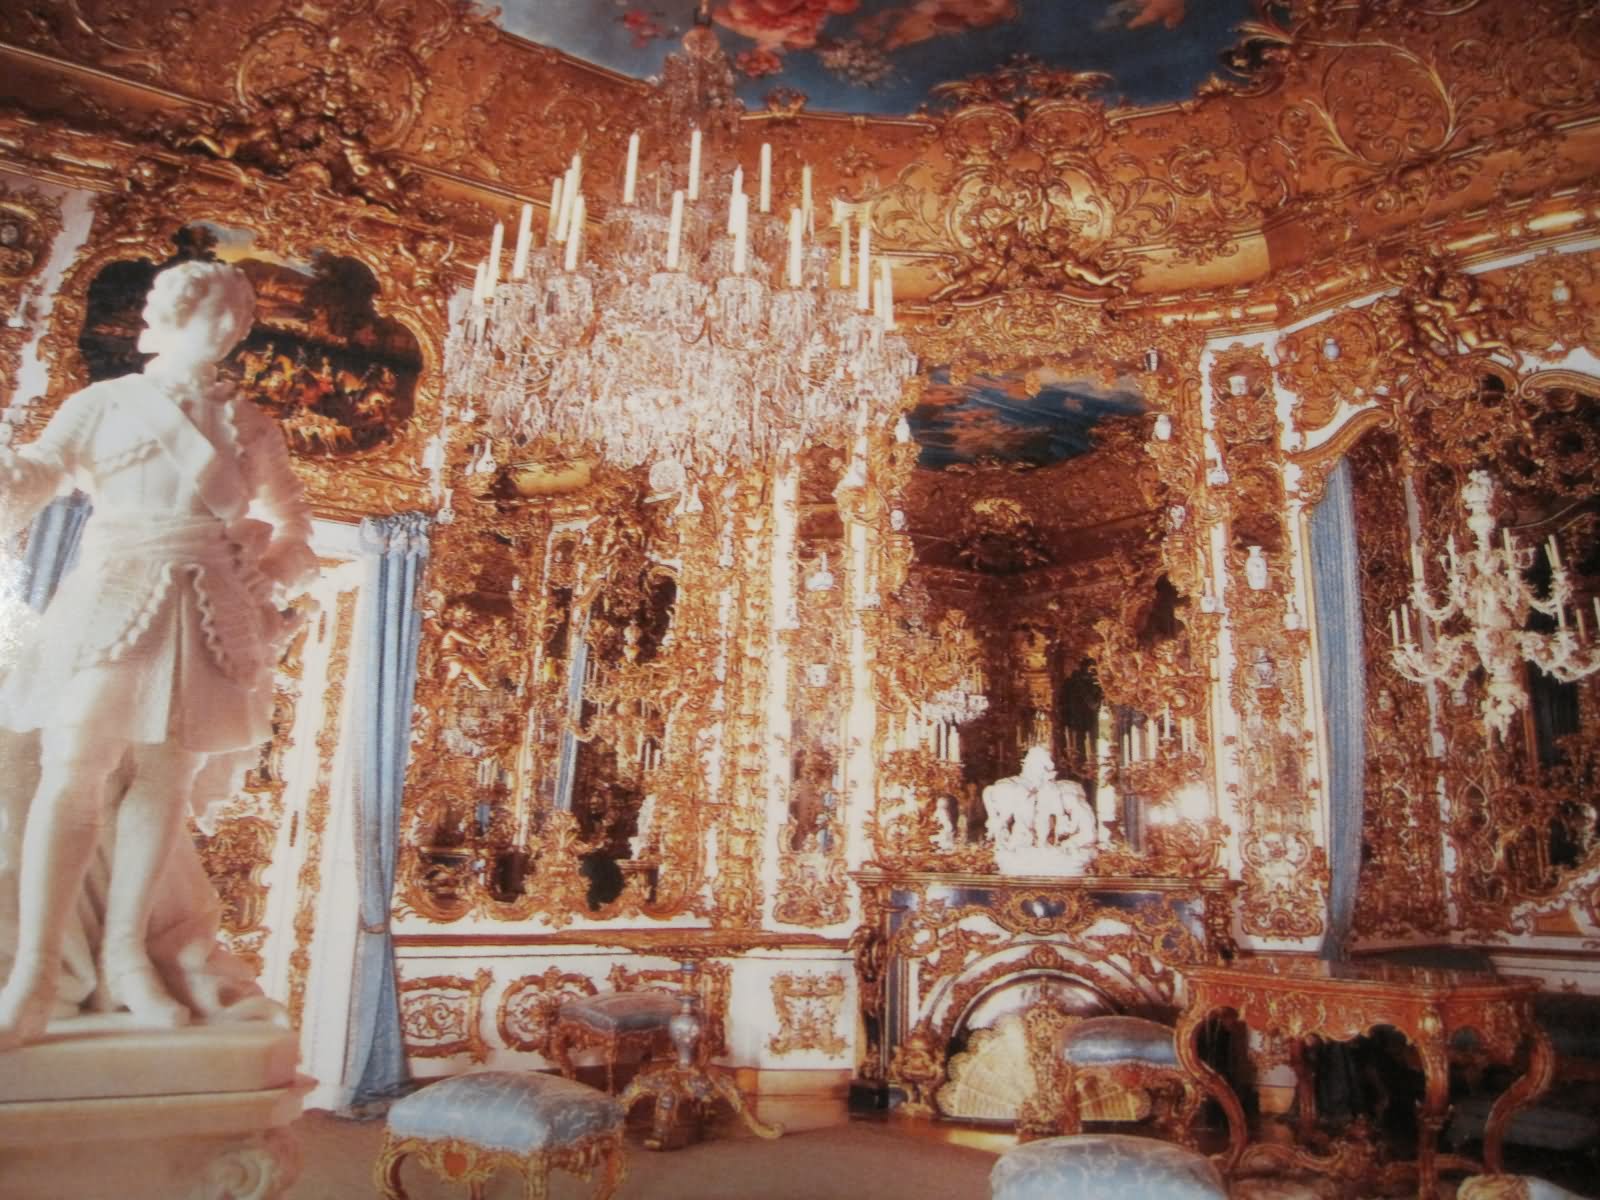 Hall Of Mirrors Inside The Linderhof Palace